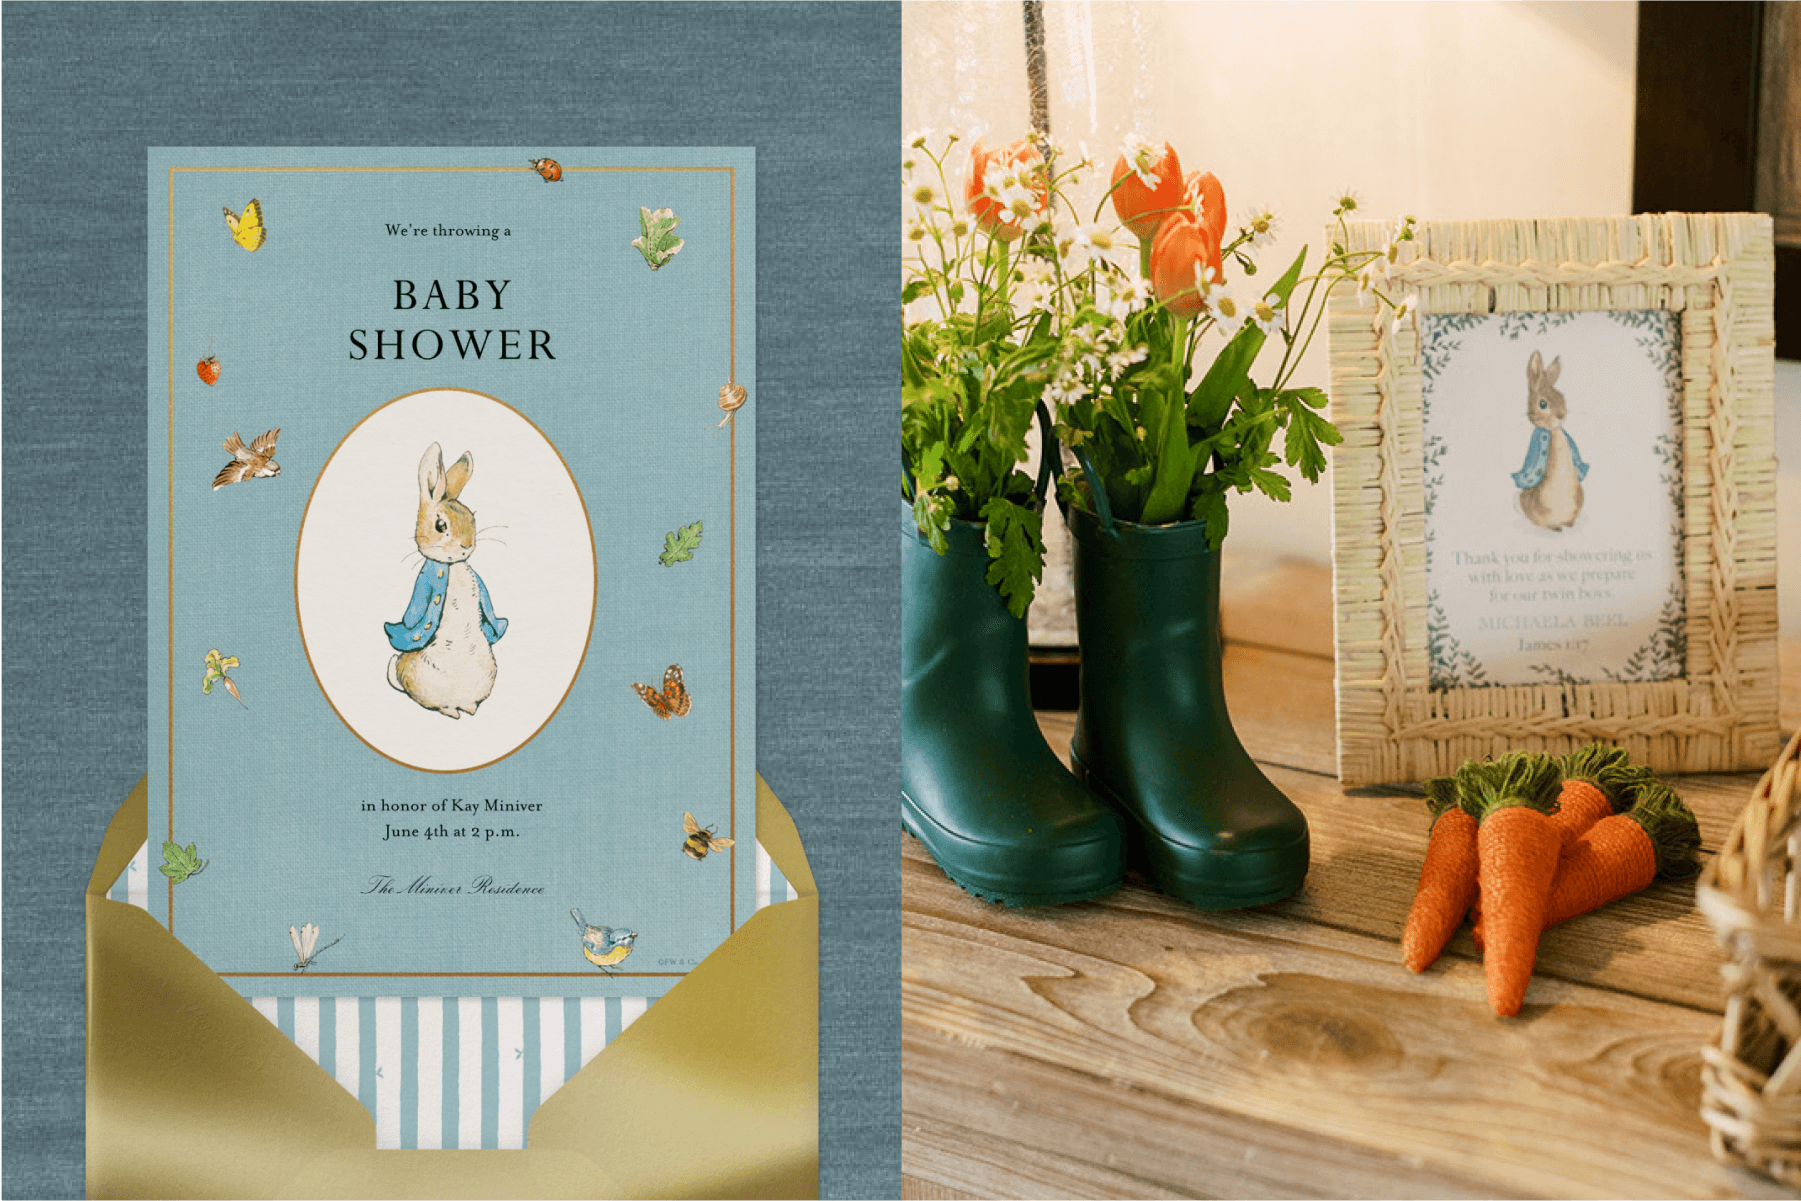 A blue invitation with Peter Rabbit in an oval and butterflies around him; a framed picture of Peter Rabbit beside flowers in children’s rain boots and knit carrots.